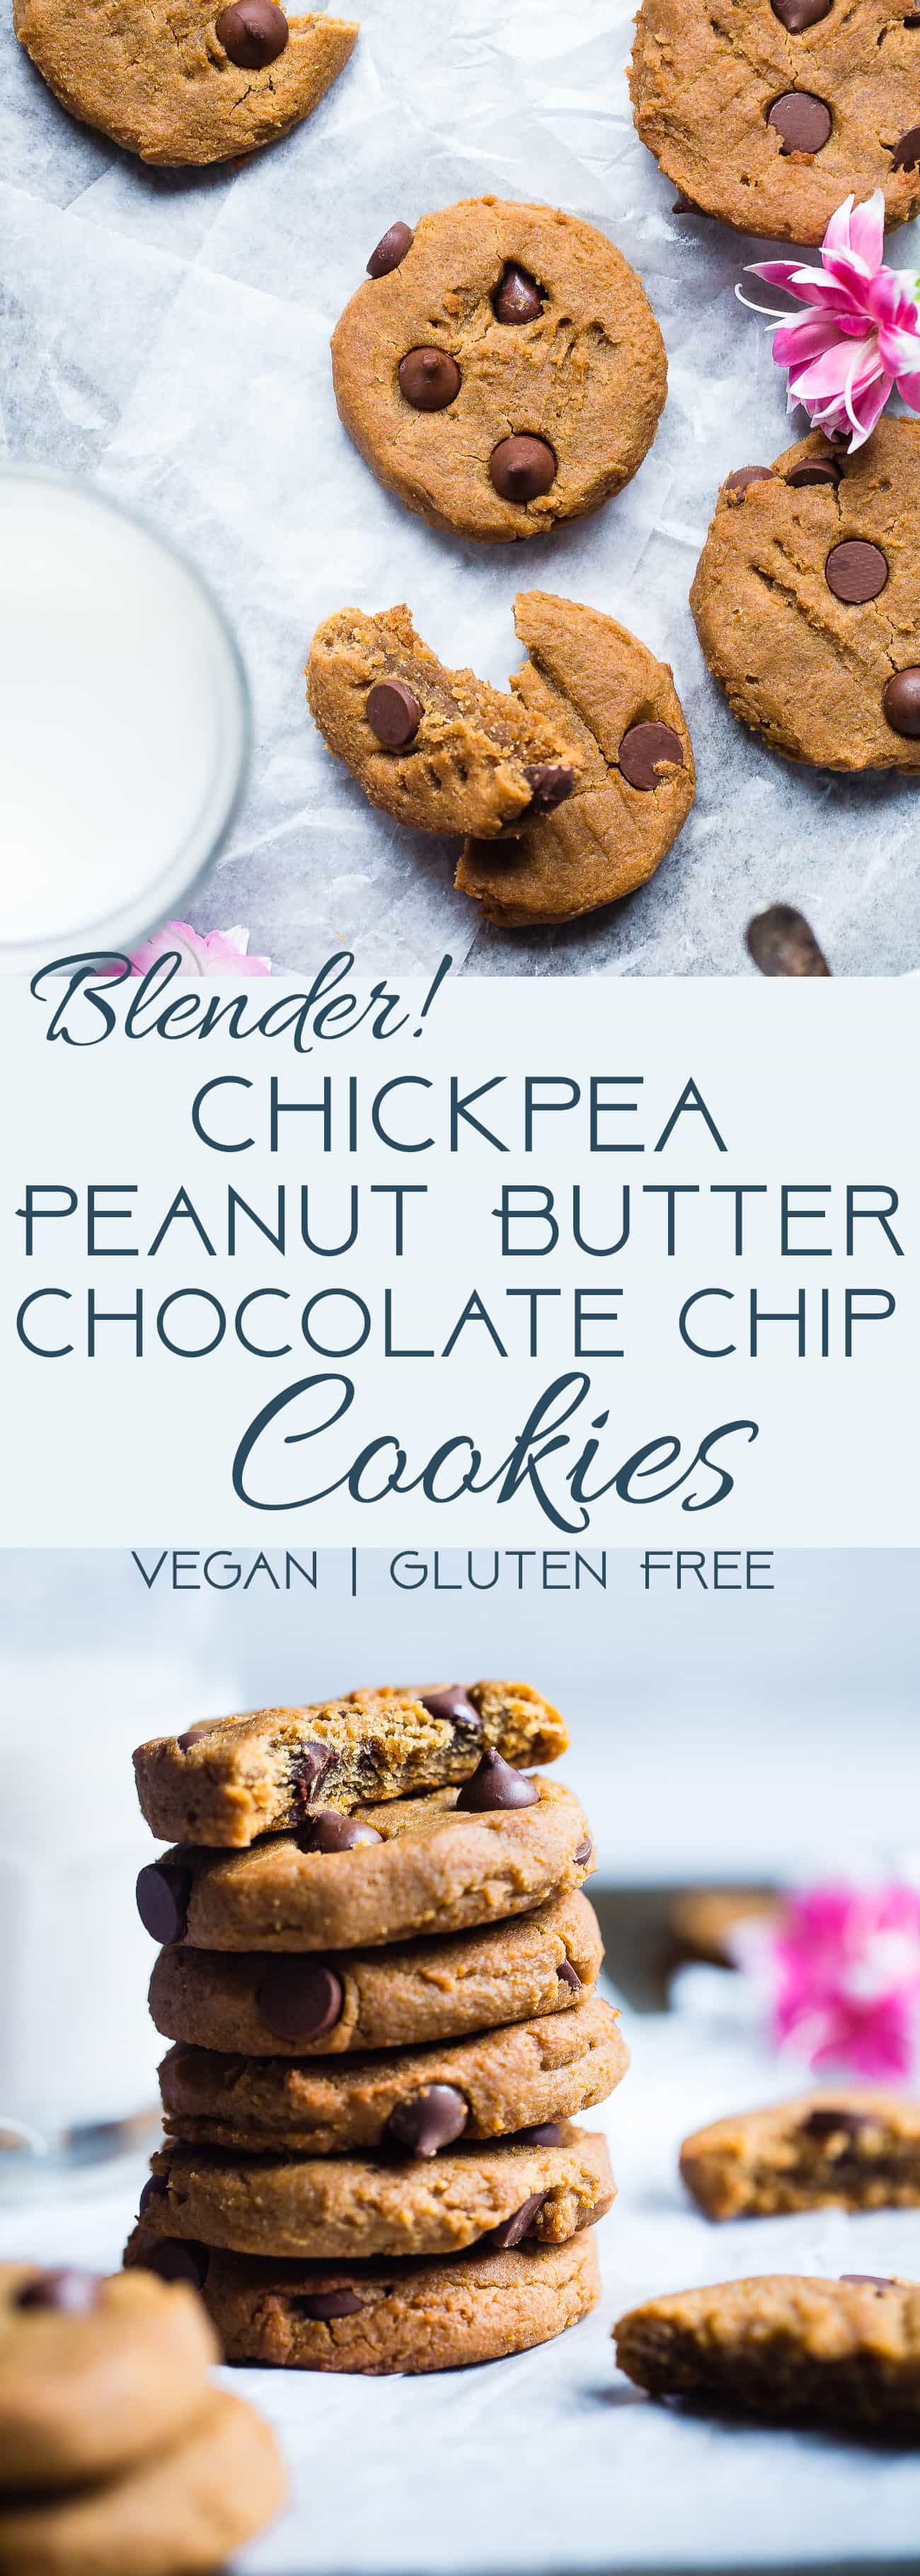 PPeanut Butter Chickpea Chocolate Chip Cookies - These kid-friendly, vegan cookies are SO soft and chewy! You would never believe they are healthy and gluten/grain/dairy/egg AND refined sugar free! | Foodfaithfitness.com | @FoodFaithFit | Vegan chickpea cookies. healthy chickpea cookies. gluten free chocolate chip cookies. healthy chocolate chip cookies. vegan chocolate chip cookies. chickpea cookie dough. flourless peanut butter cookies. gluten free peanut butter cookies. healthy peanut butter cookies